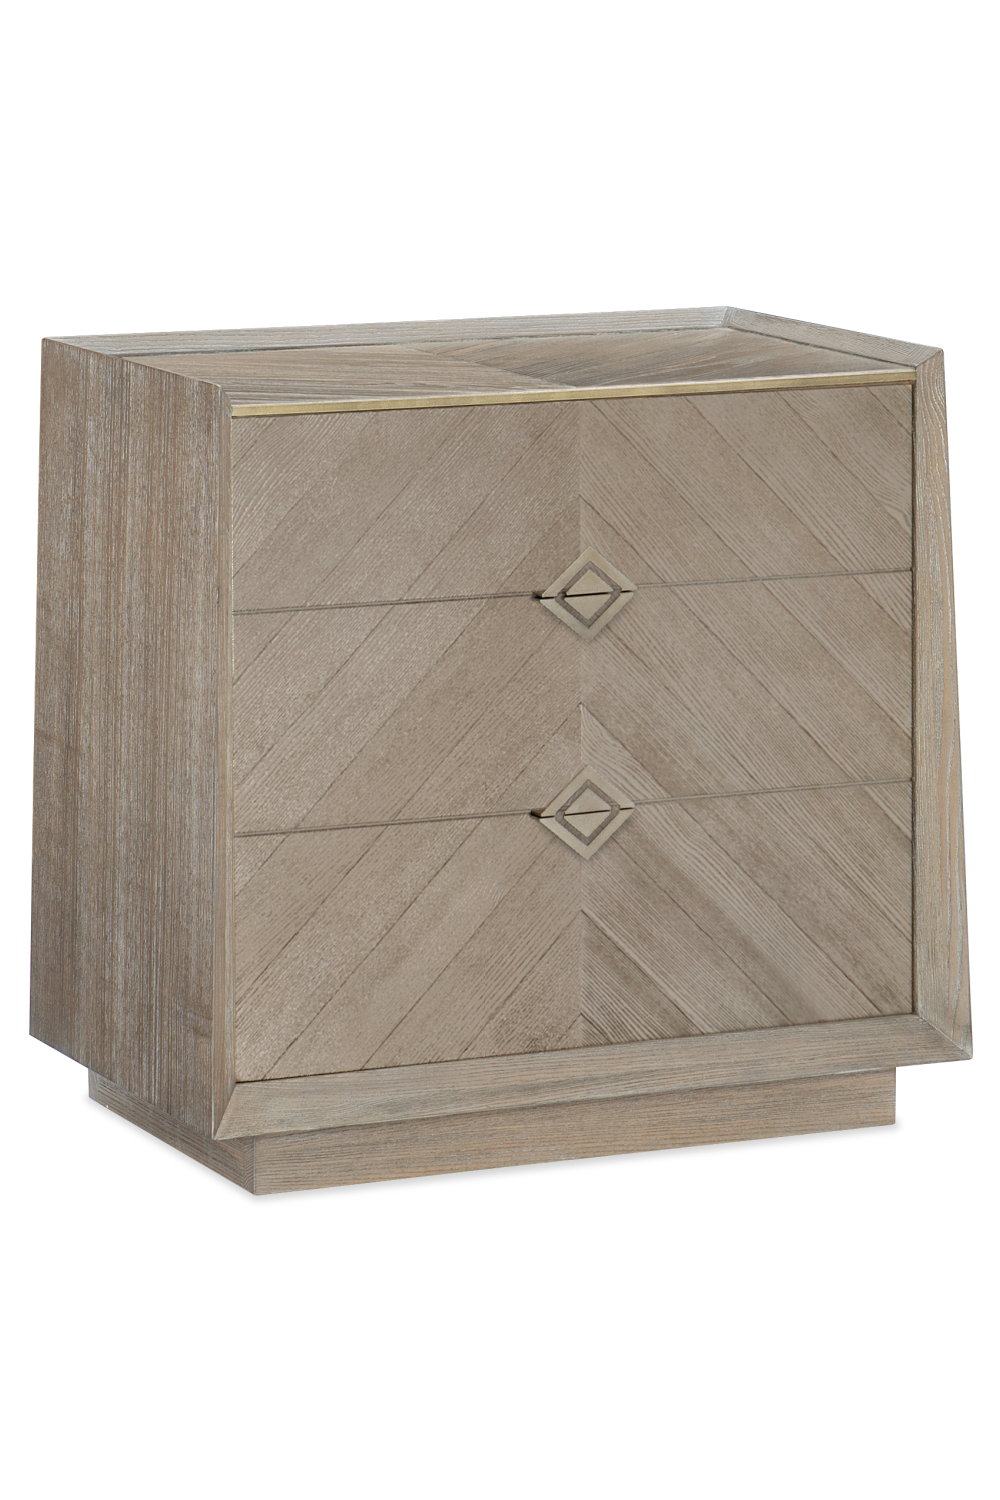 Chevron Patterned Nightstand | Caracole Crossed Purposes | Oroa.com